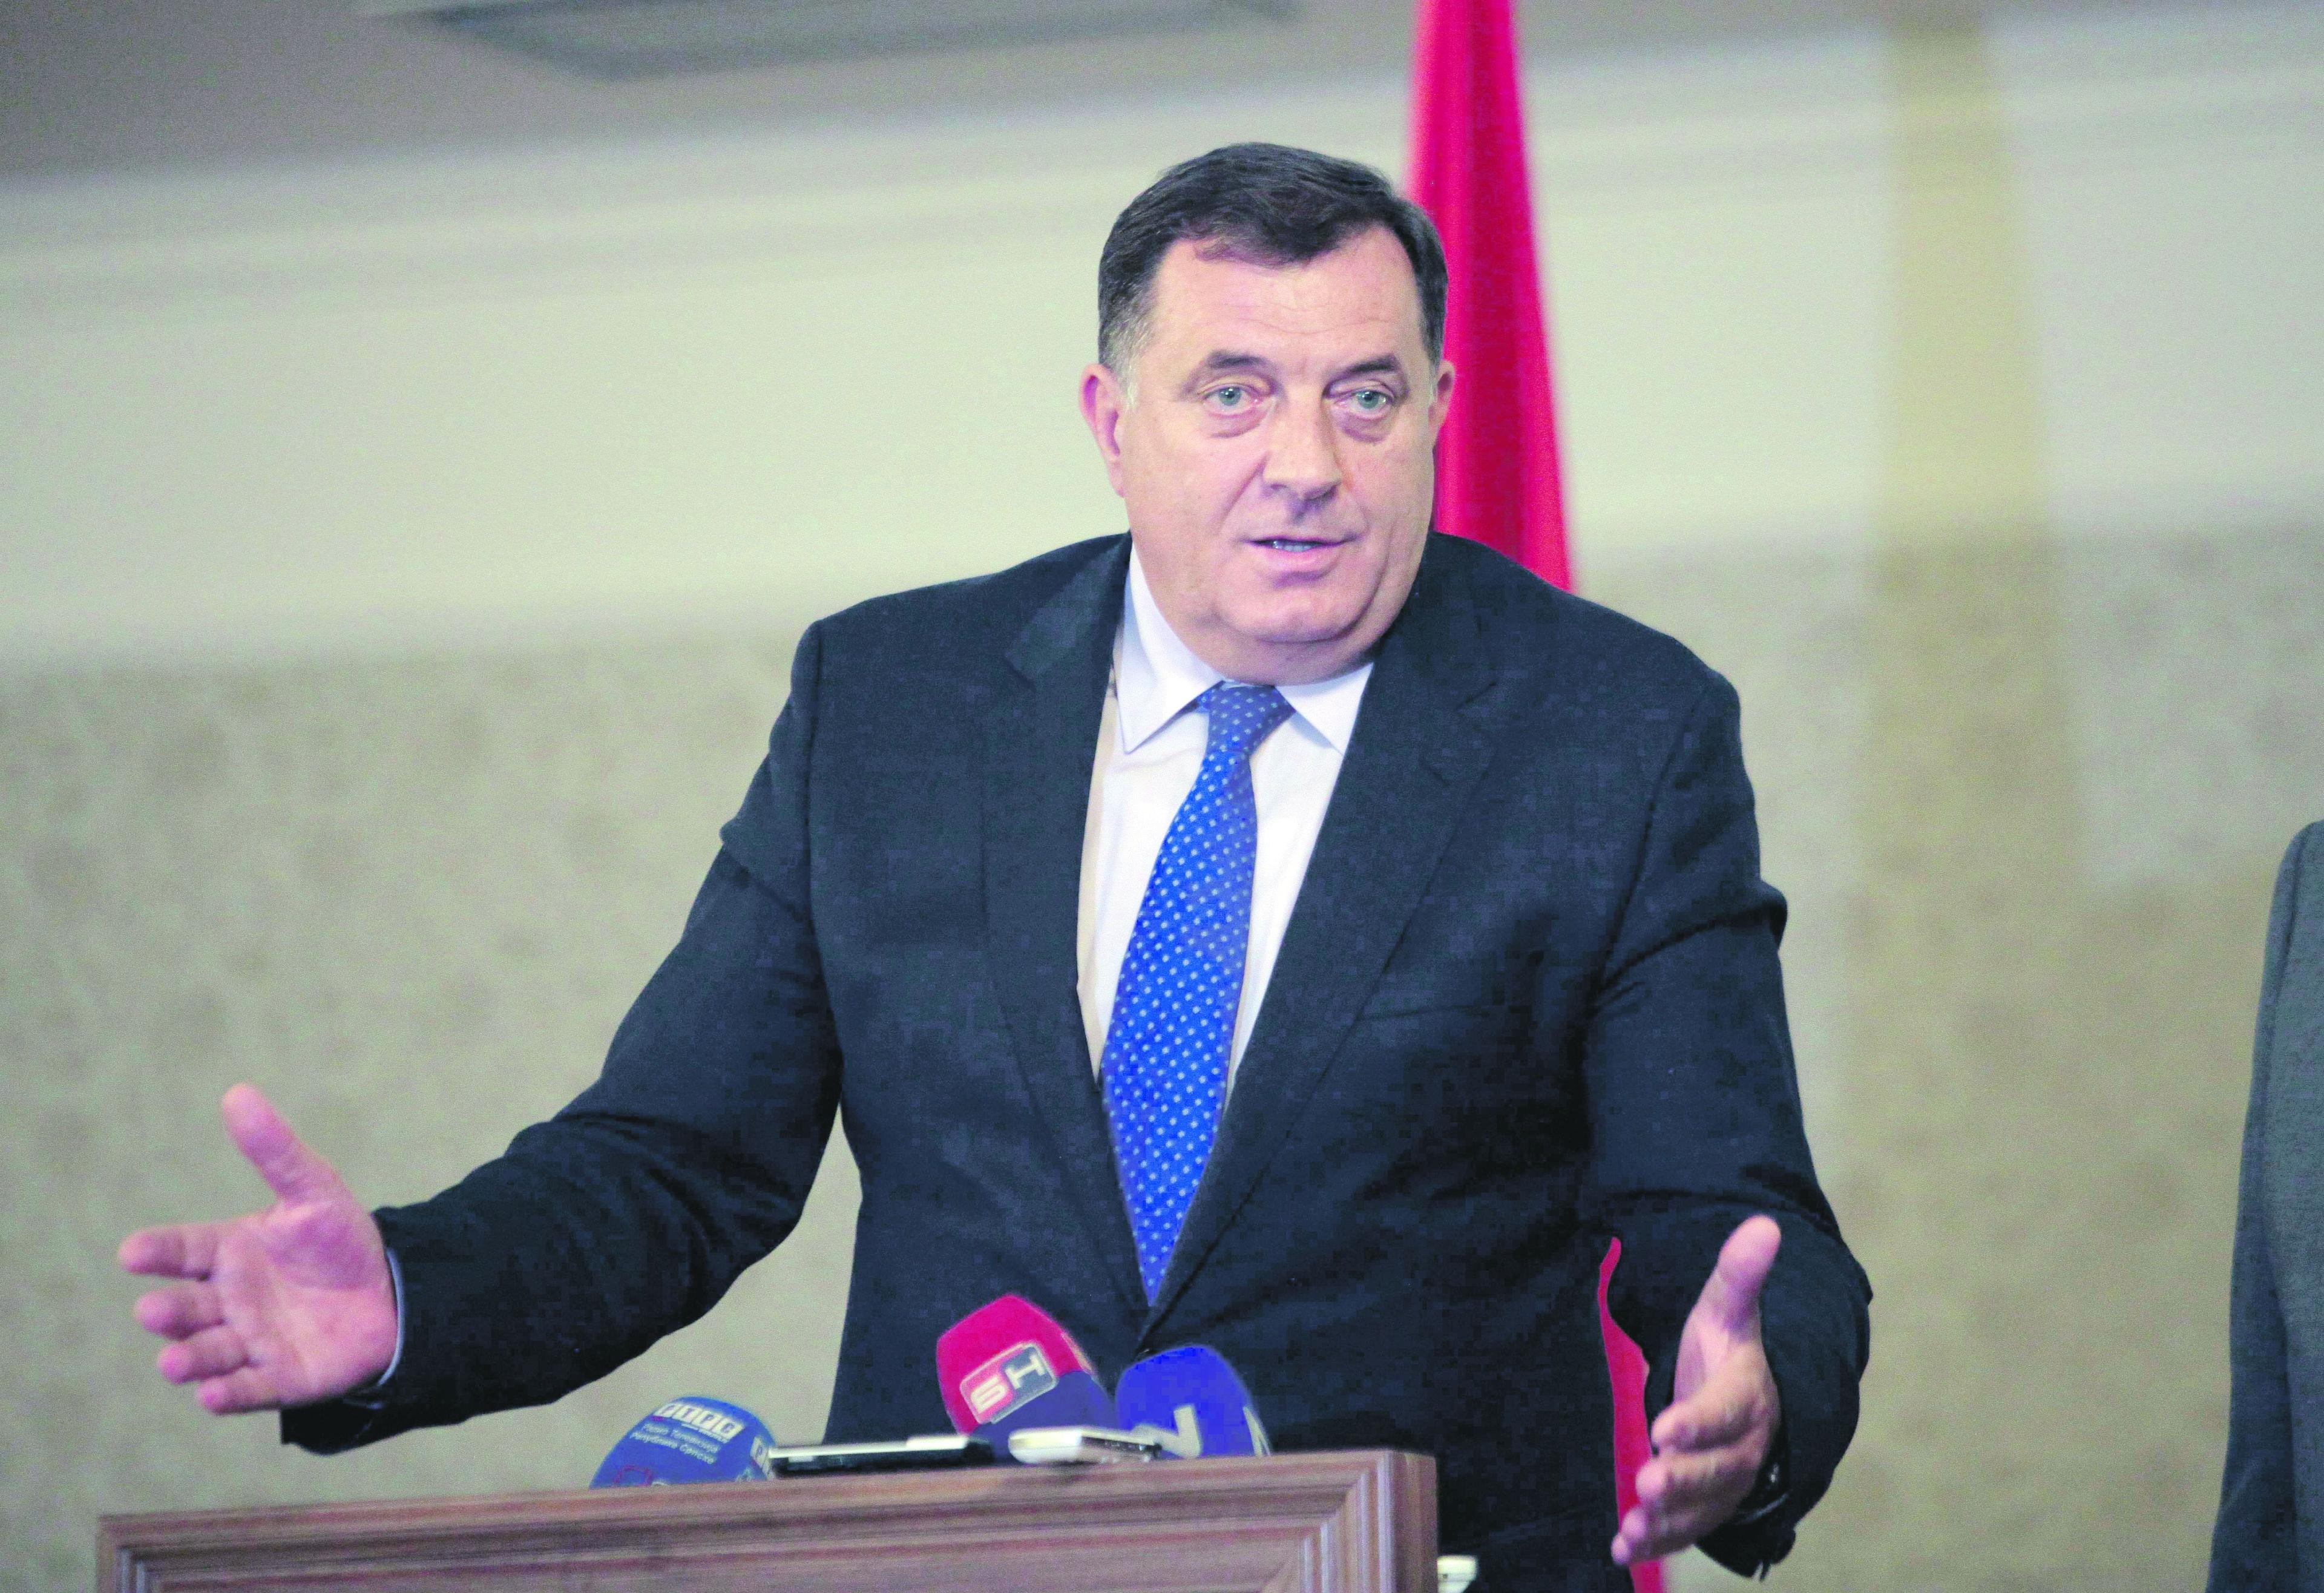 Strong condemnation of Dodik's outburst at the UN